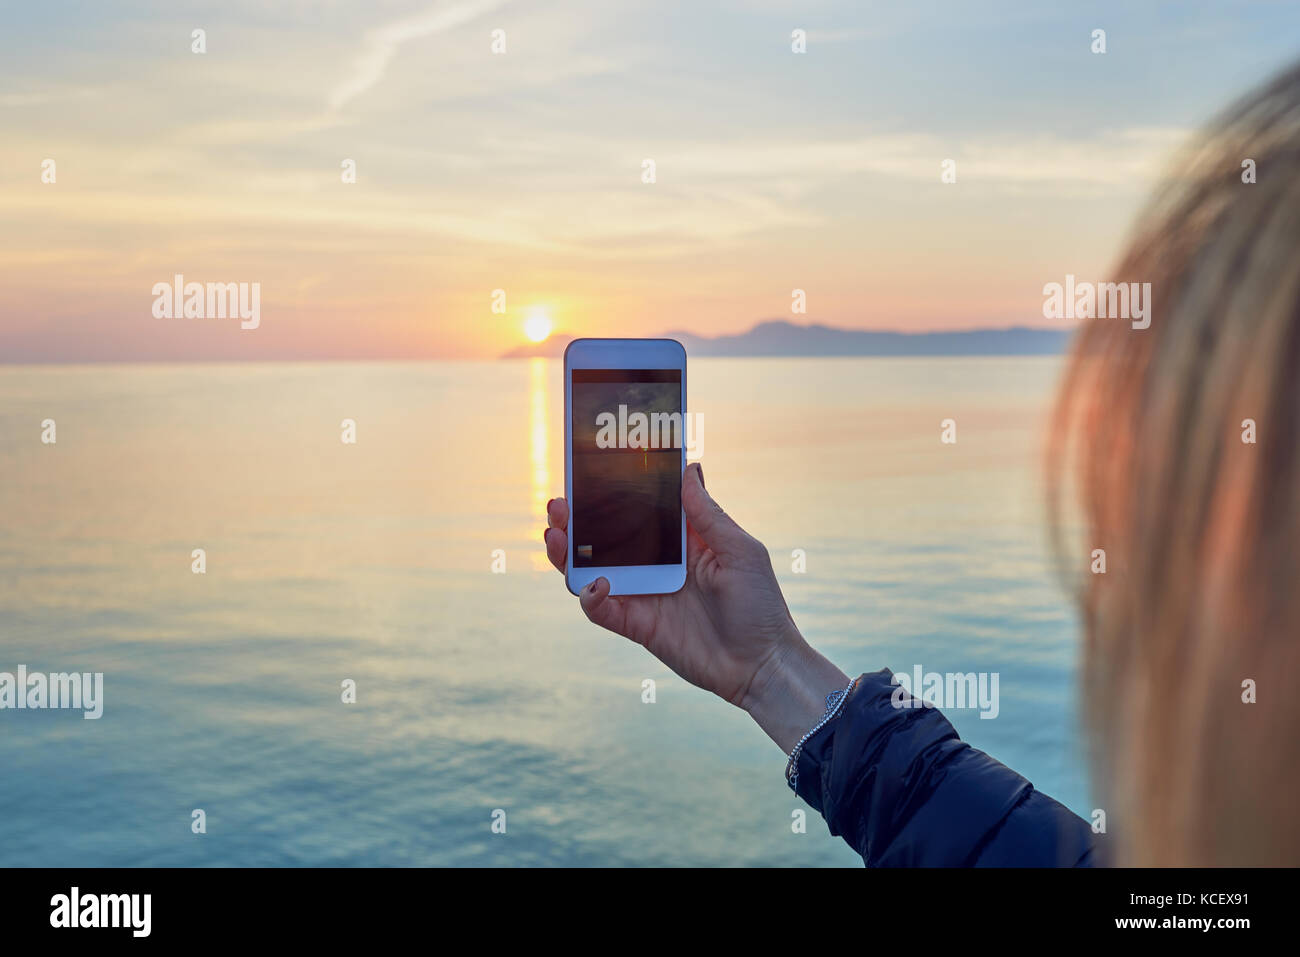 Young blond woman taking a photo of a colorful ocean sunset on a mobile phone with a close up view of the screen of the cellphone with the sea and sky Stock Photo